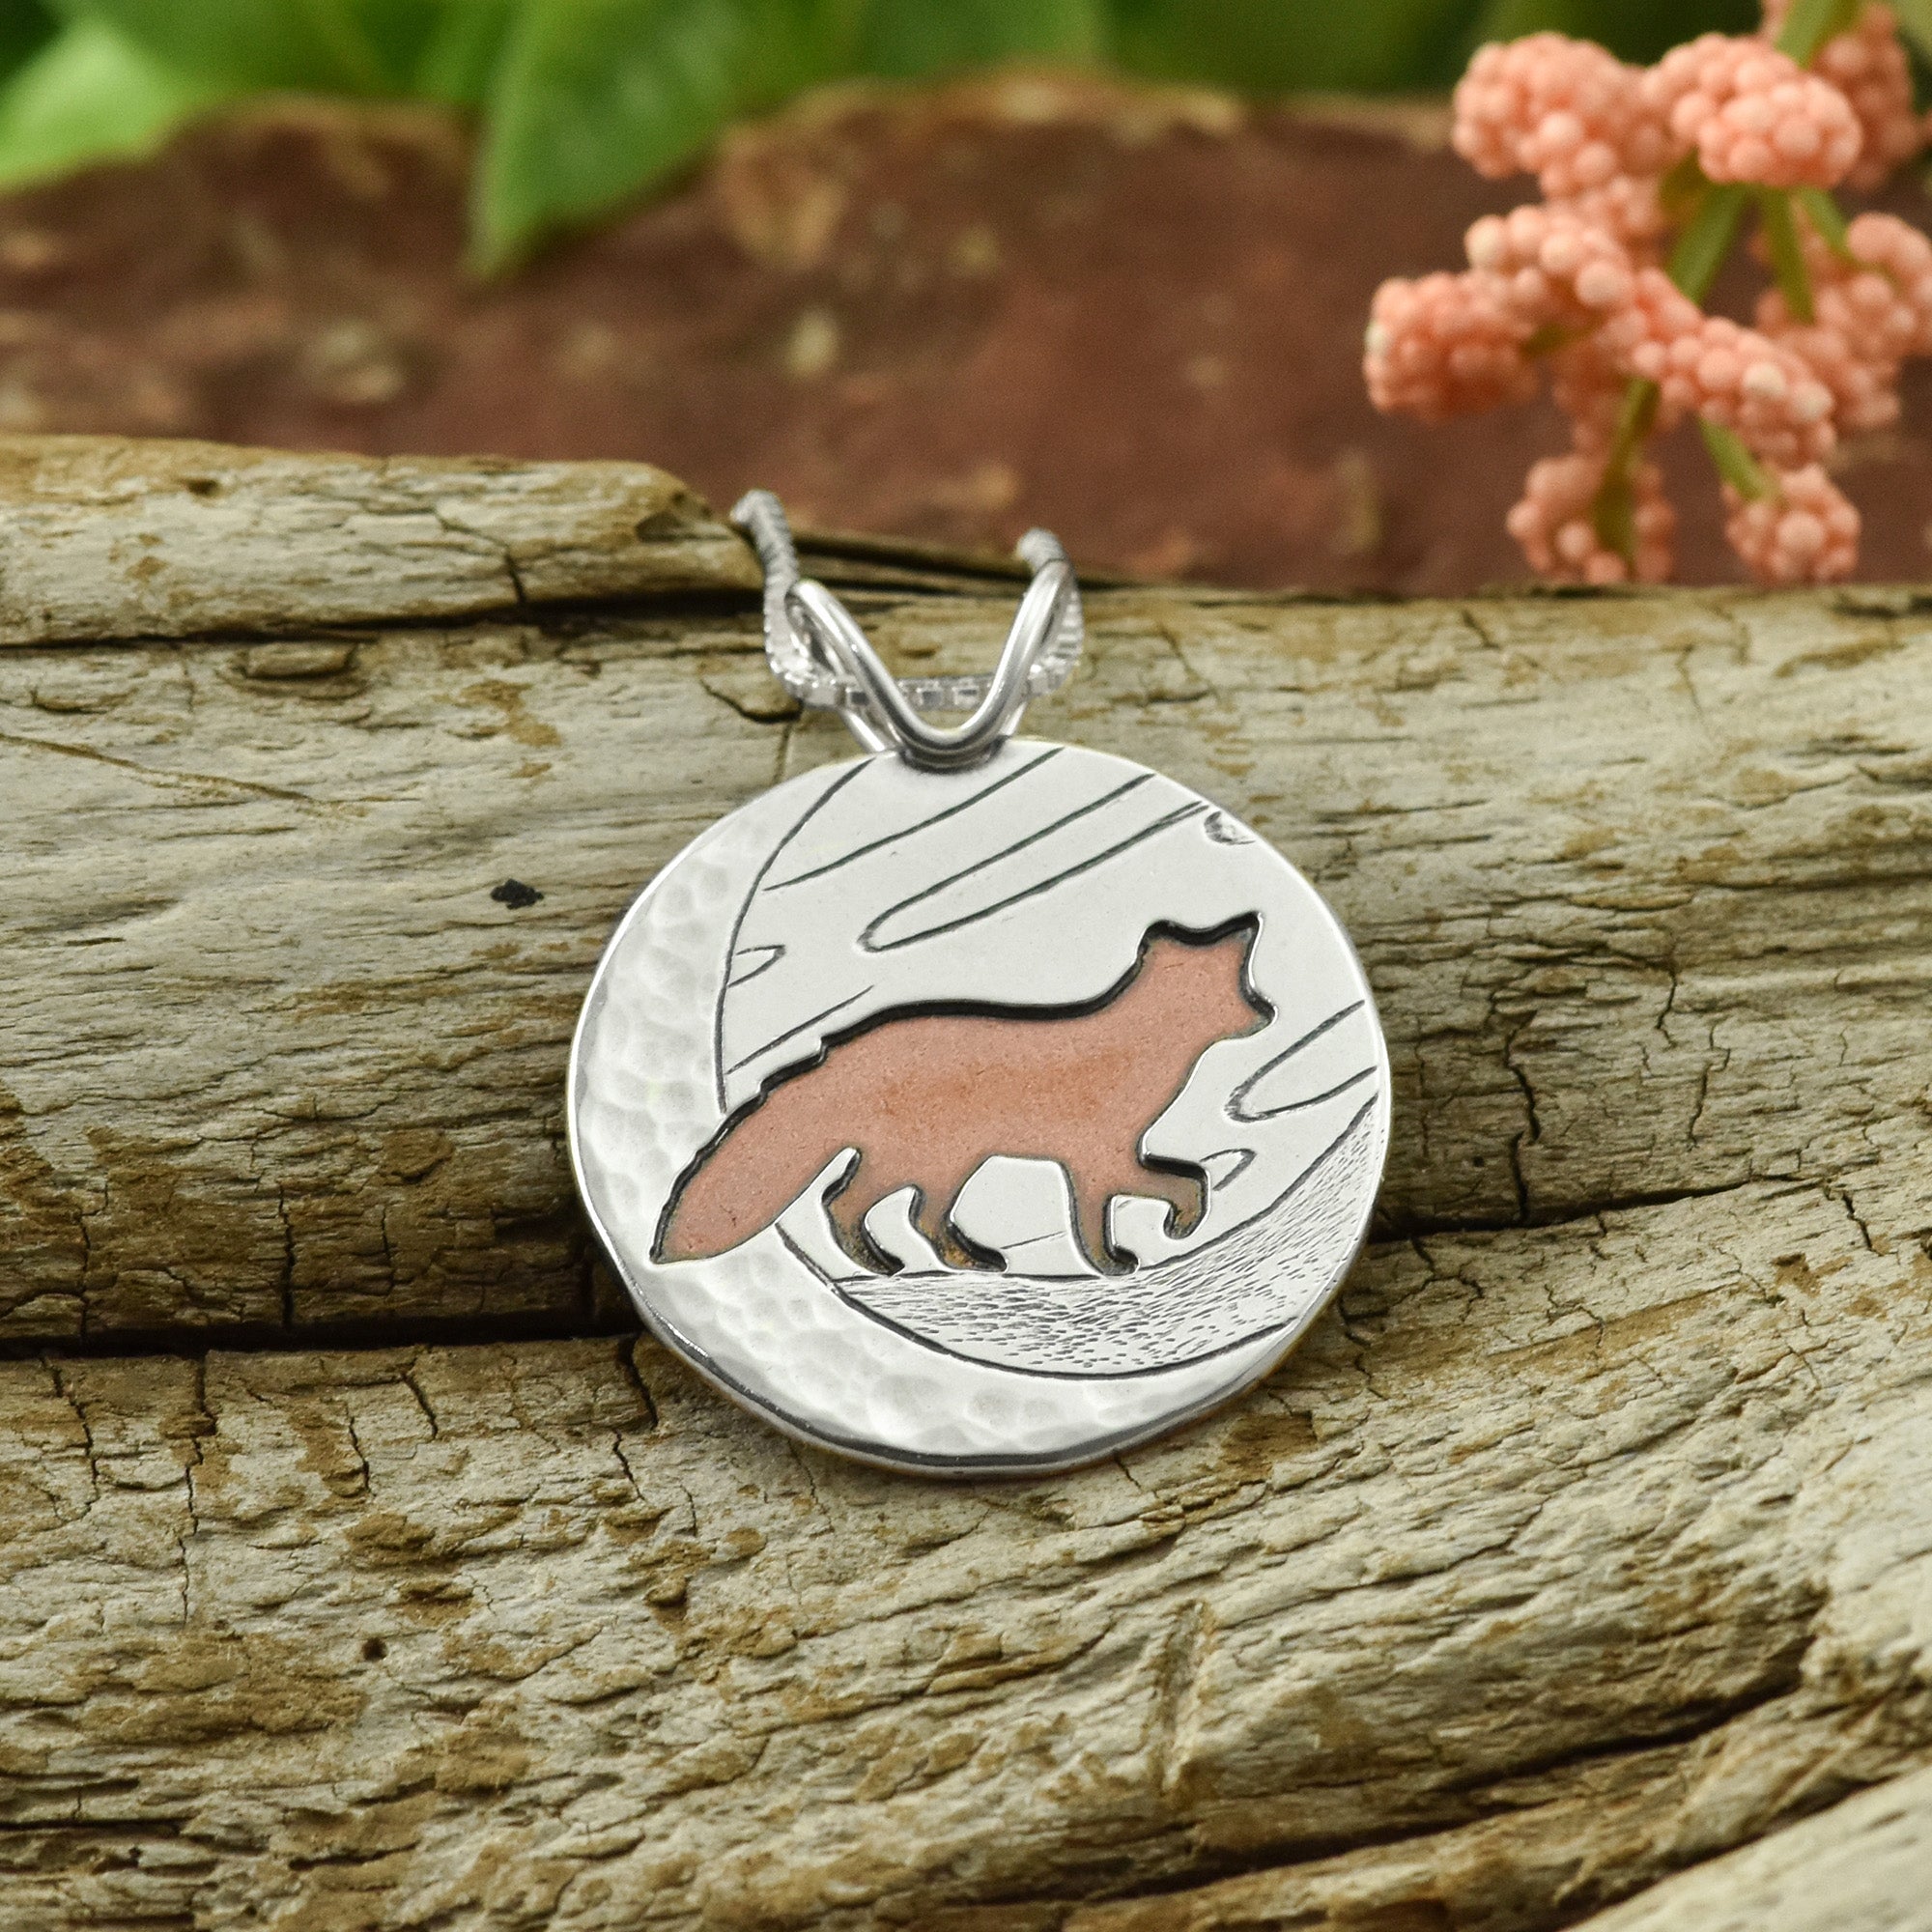 Solid silver Fox Pendant with an adjustable silver chain.